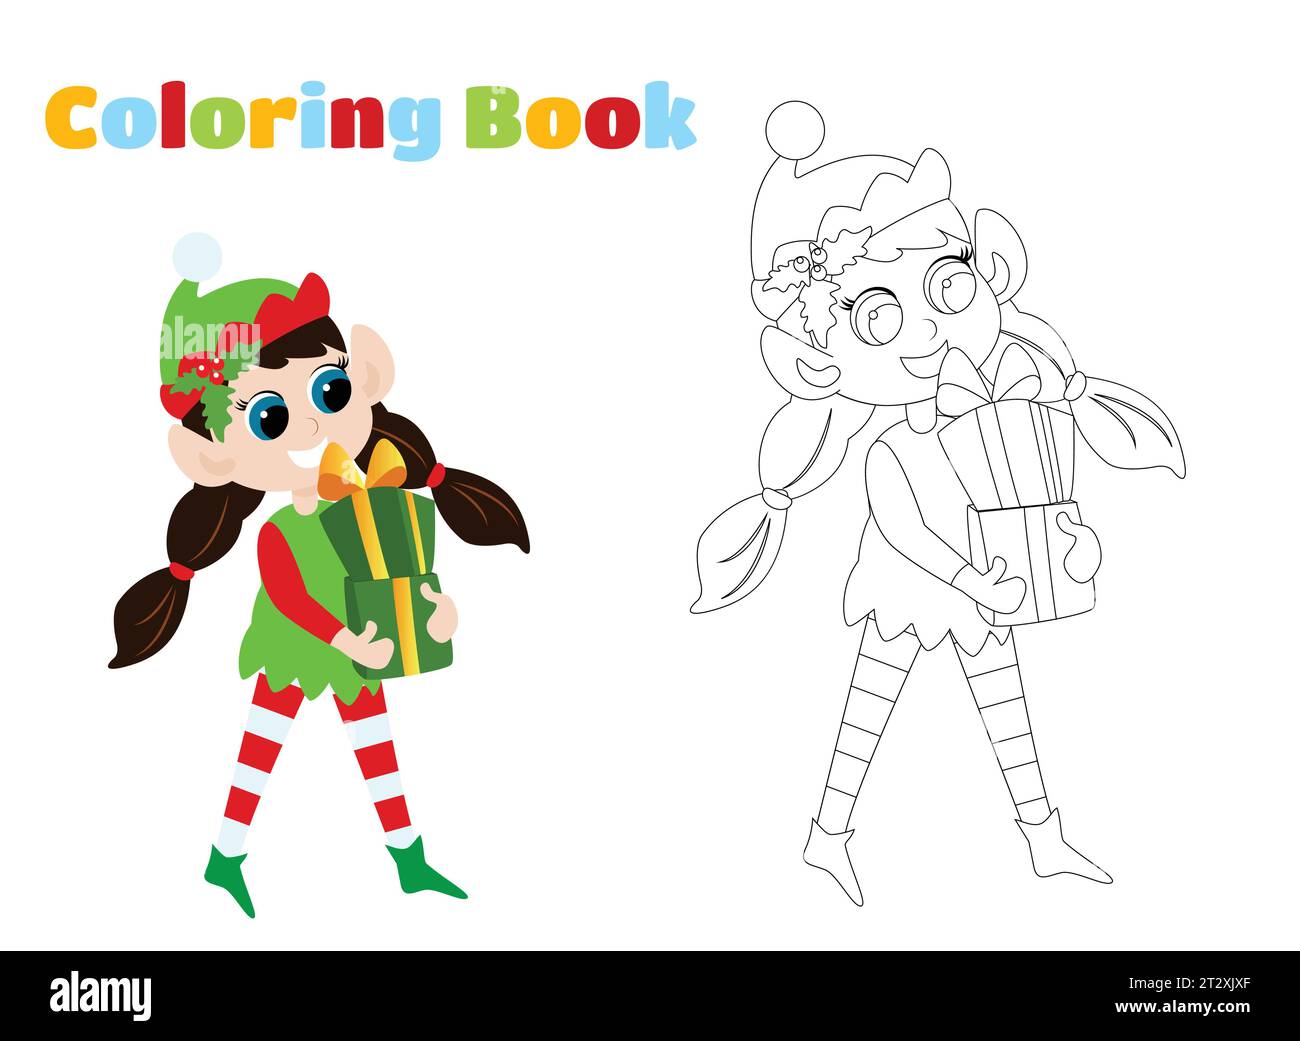 Coloring page. A cute elf girl in a traditional costume with pigtails carries boxes of Christmas gifts. Christmas character illustration in cartoon st Stock Vector